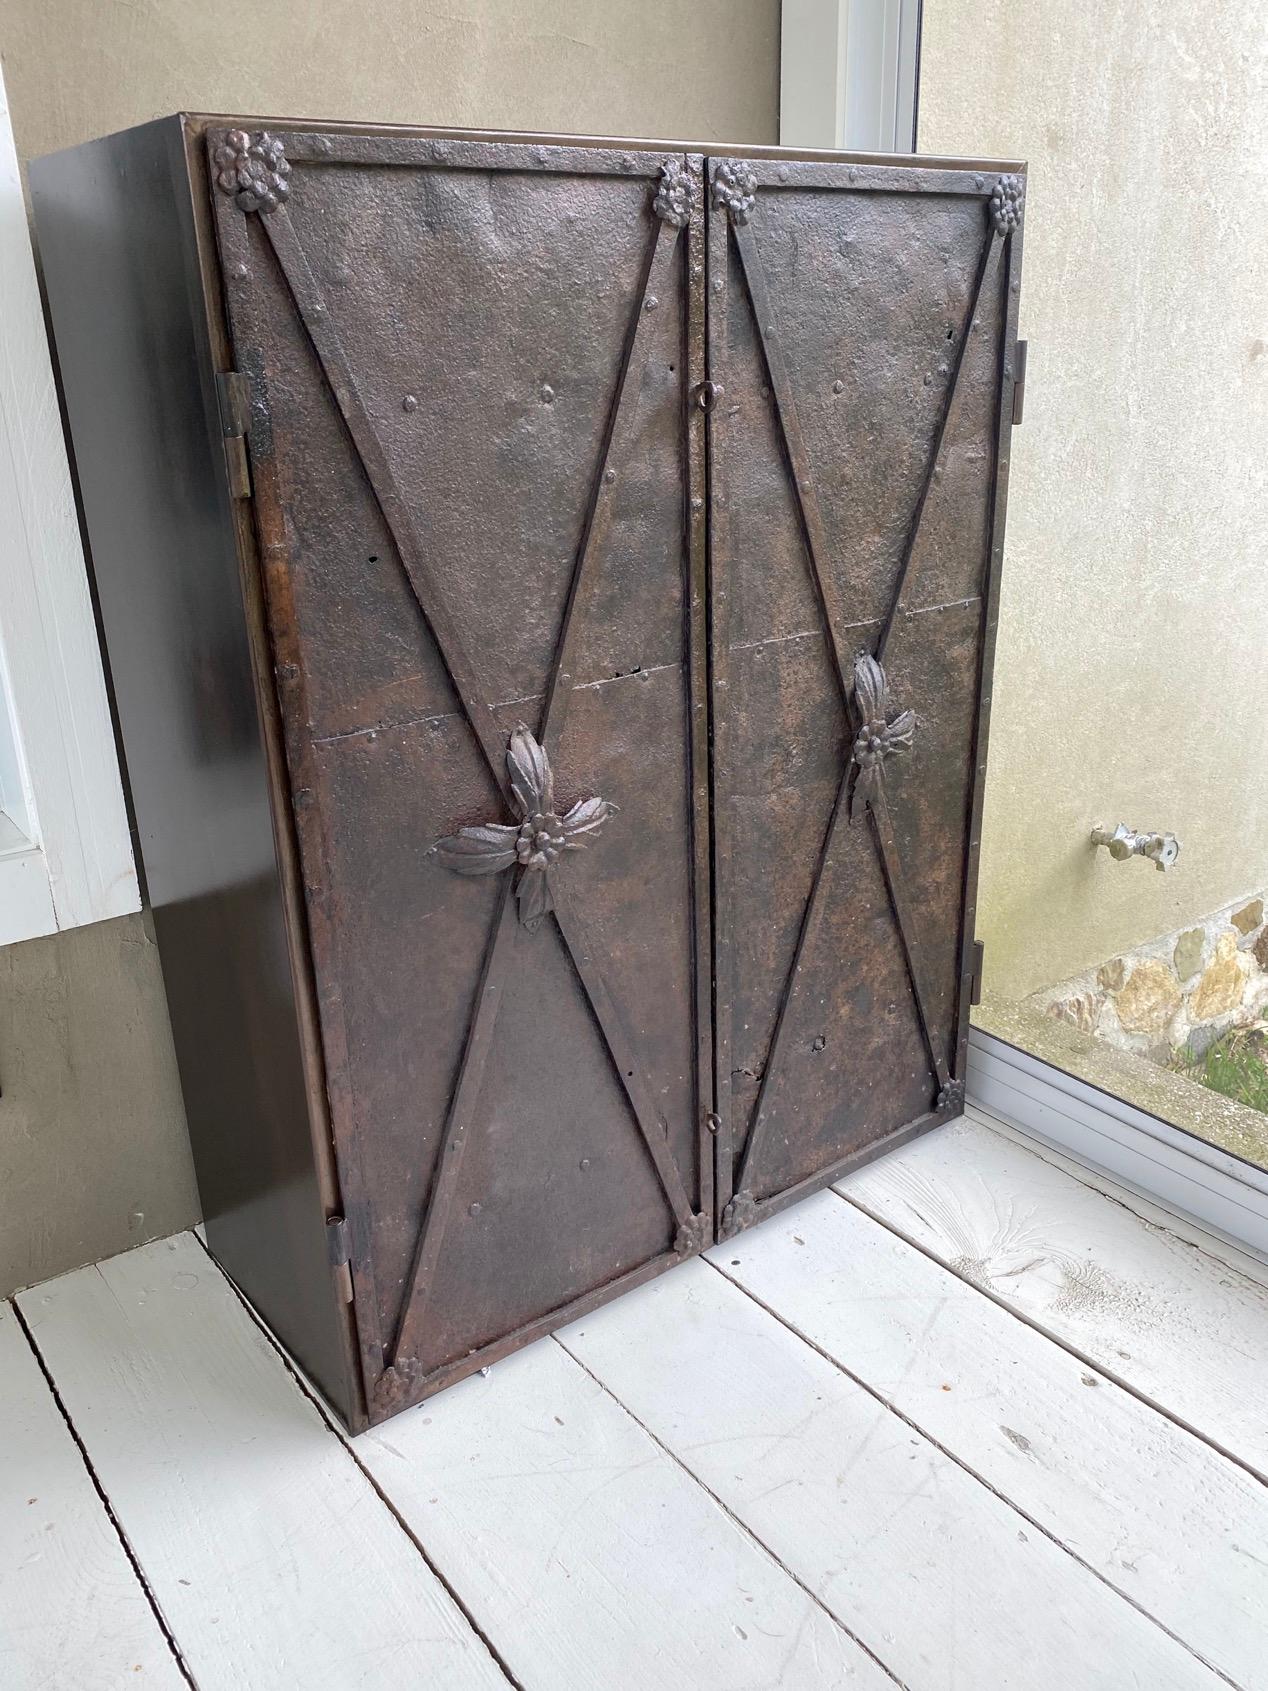 These Directoire period metal doors were once window shutters on an 18th century French chateau that now have been repurposed and made into doors for this cabinet which can lend itself to many uses such as a bar or storage cabinet.
The doors are